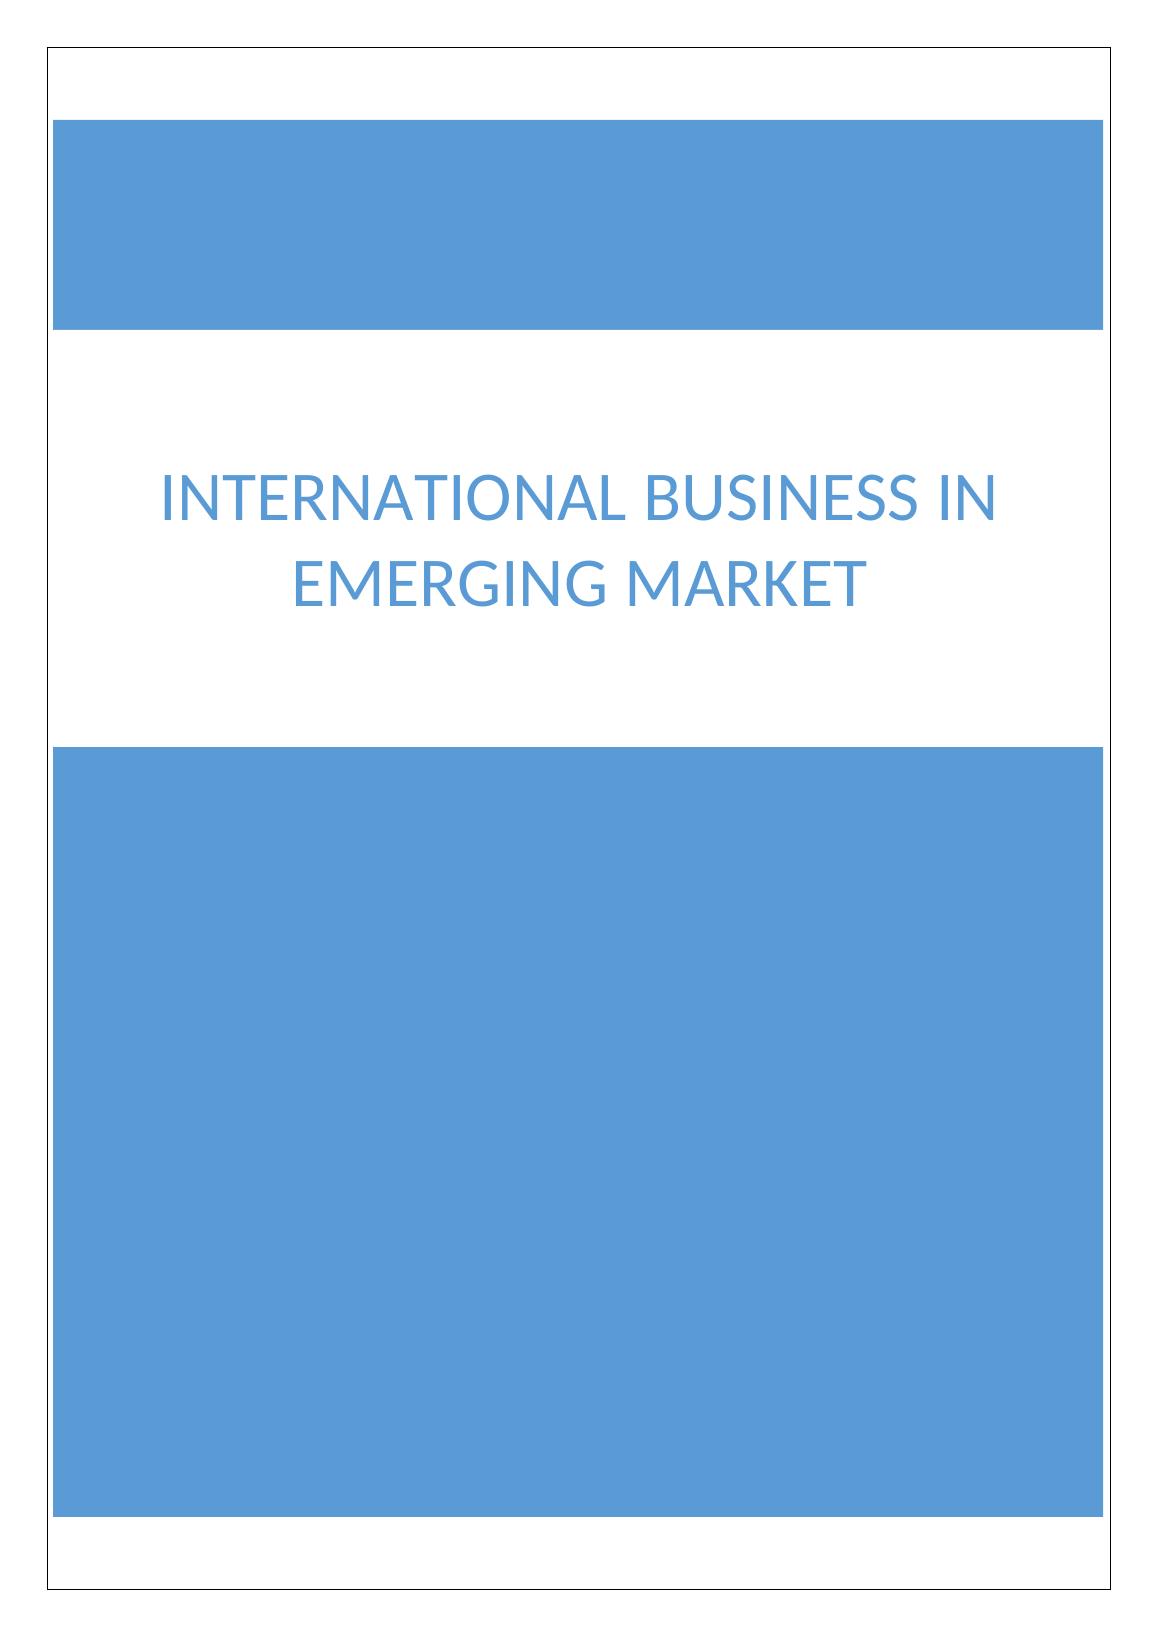 International business in emerging market Page | 1 International business in emerging market_1